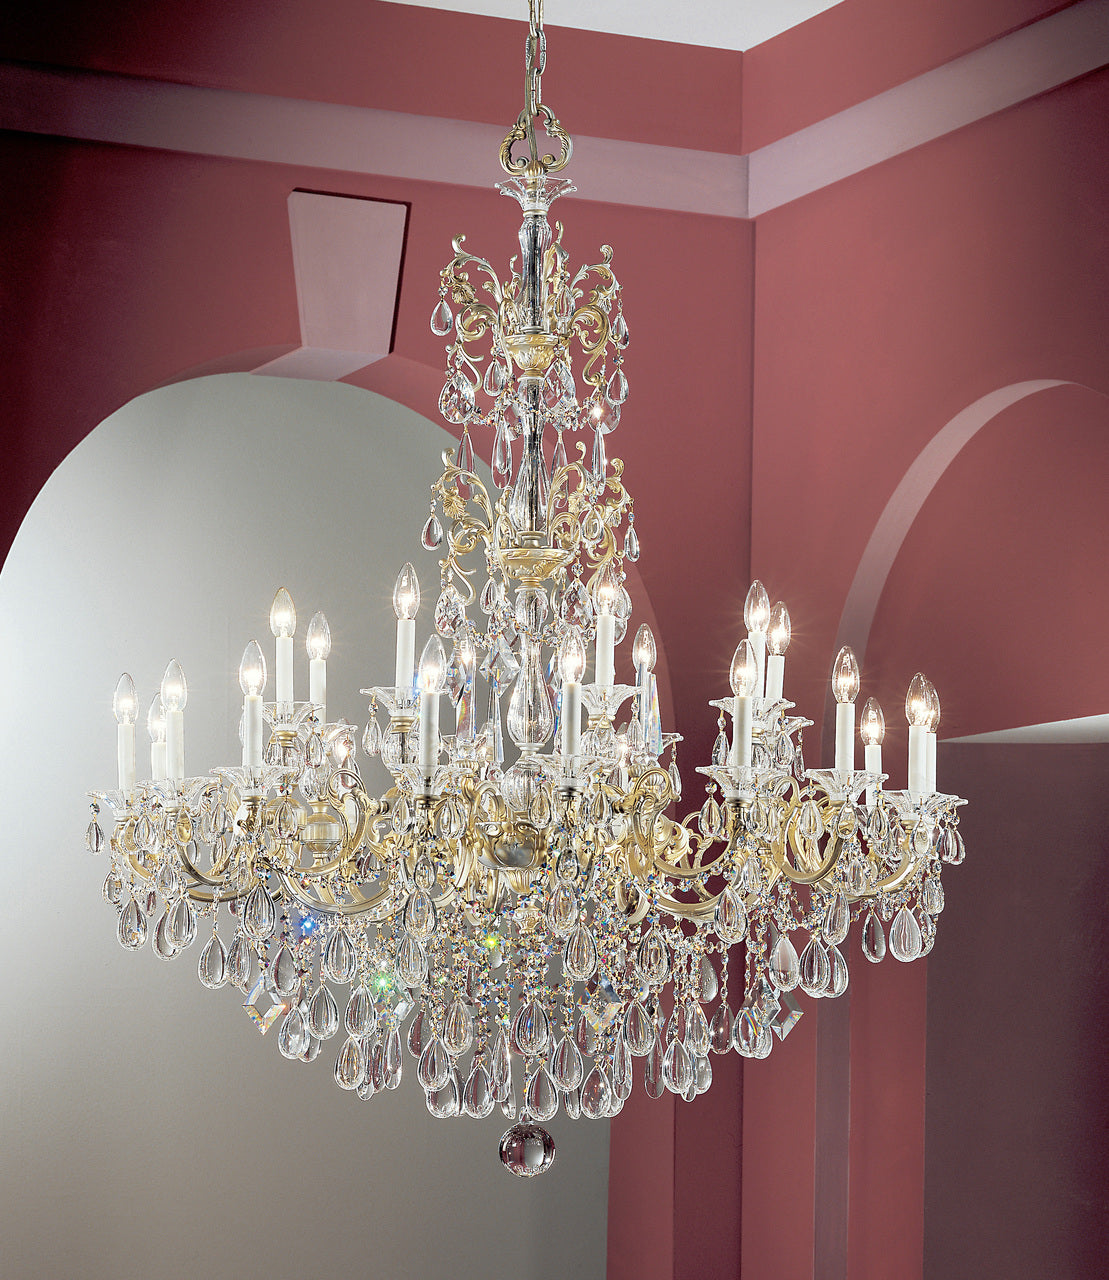 Classic Lighting 57025 CHP CGT Via Venteo Crystal Chandelier in Champagne Pearl (Imported from Spain)